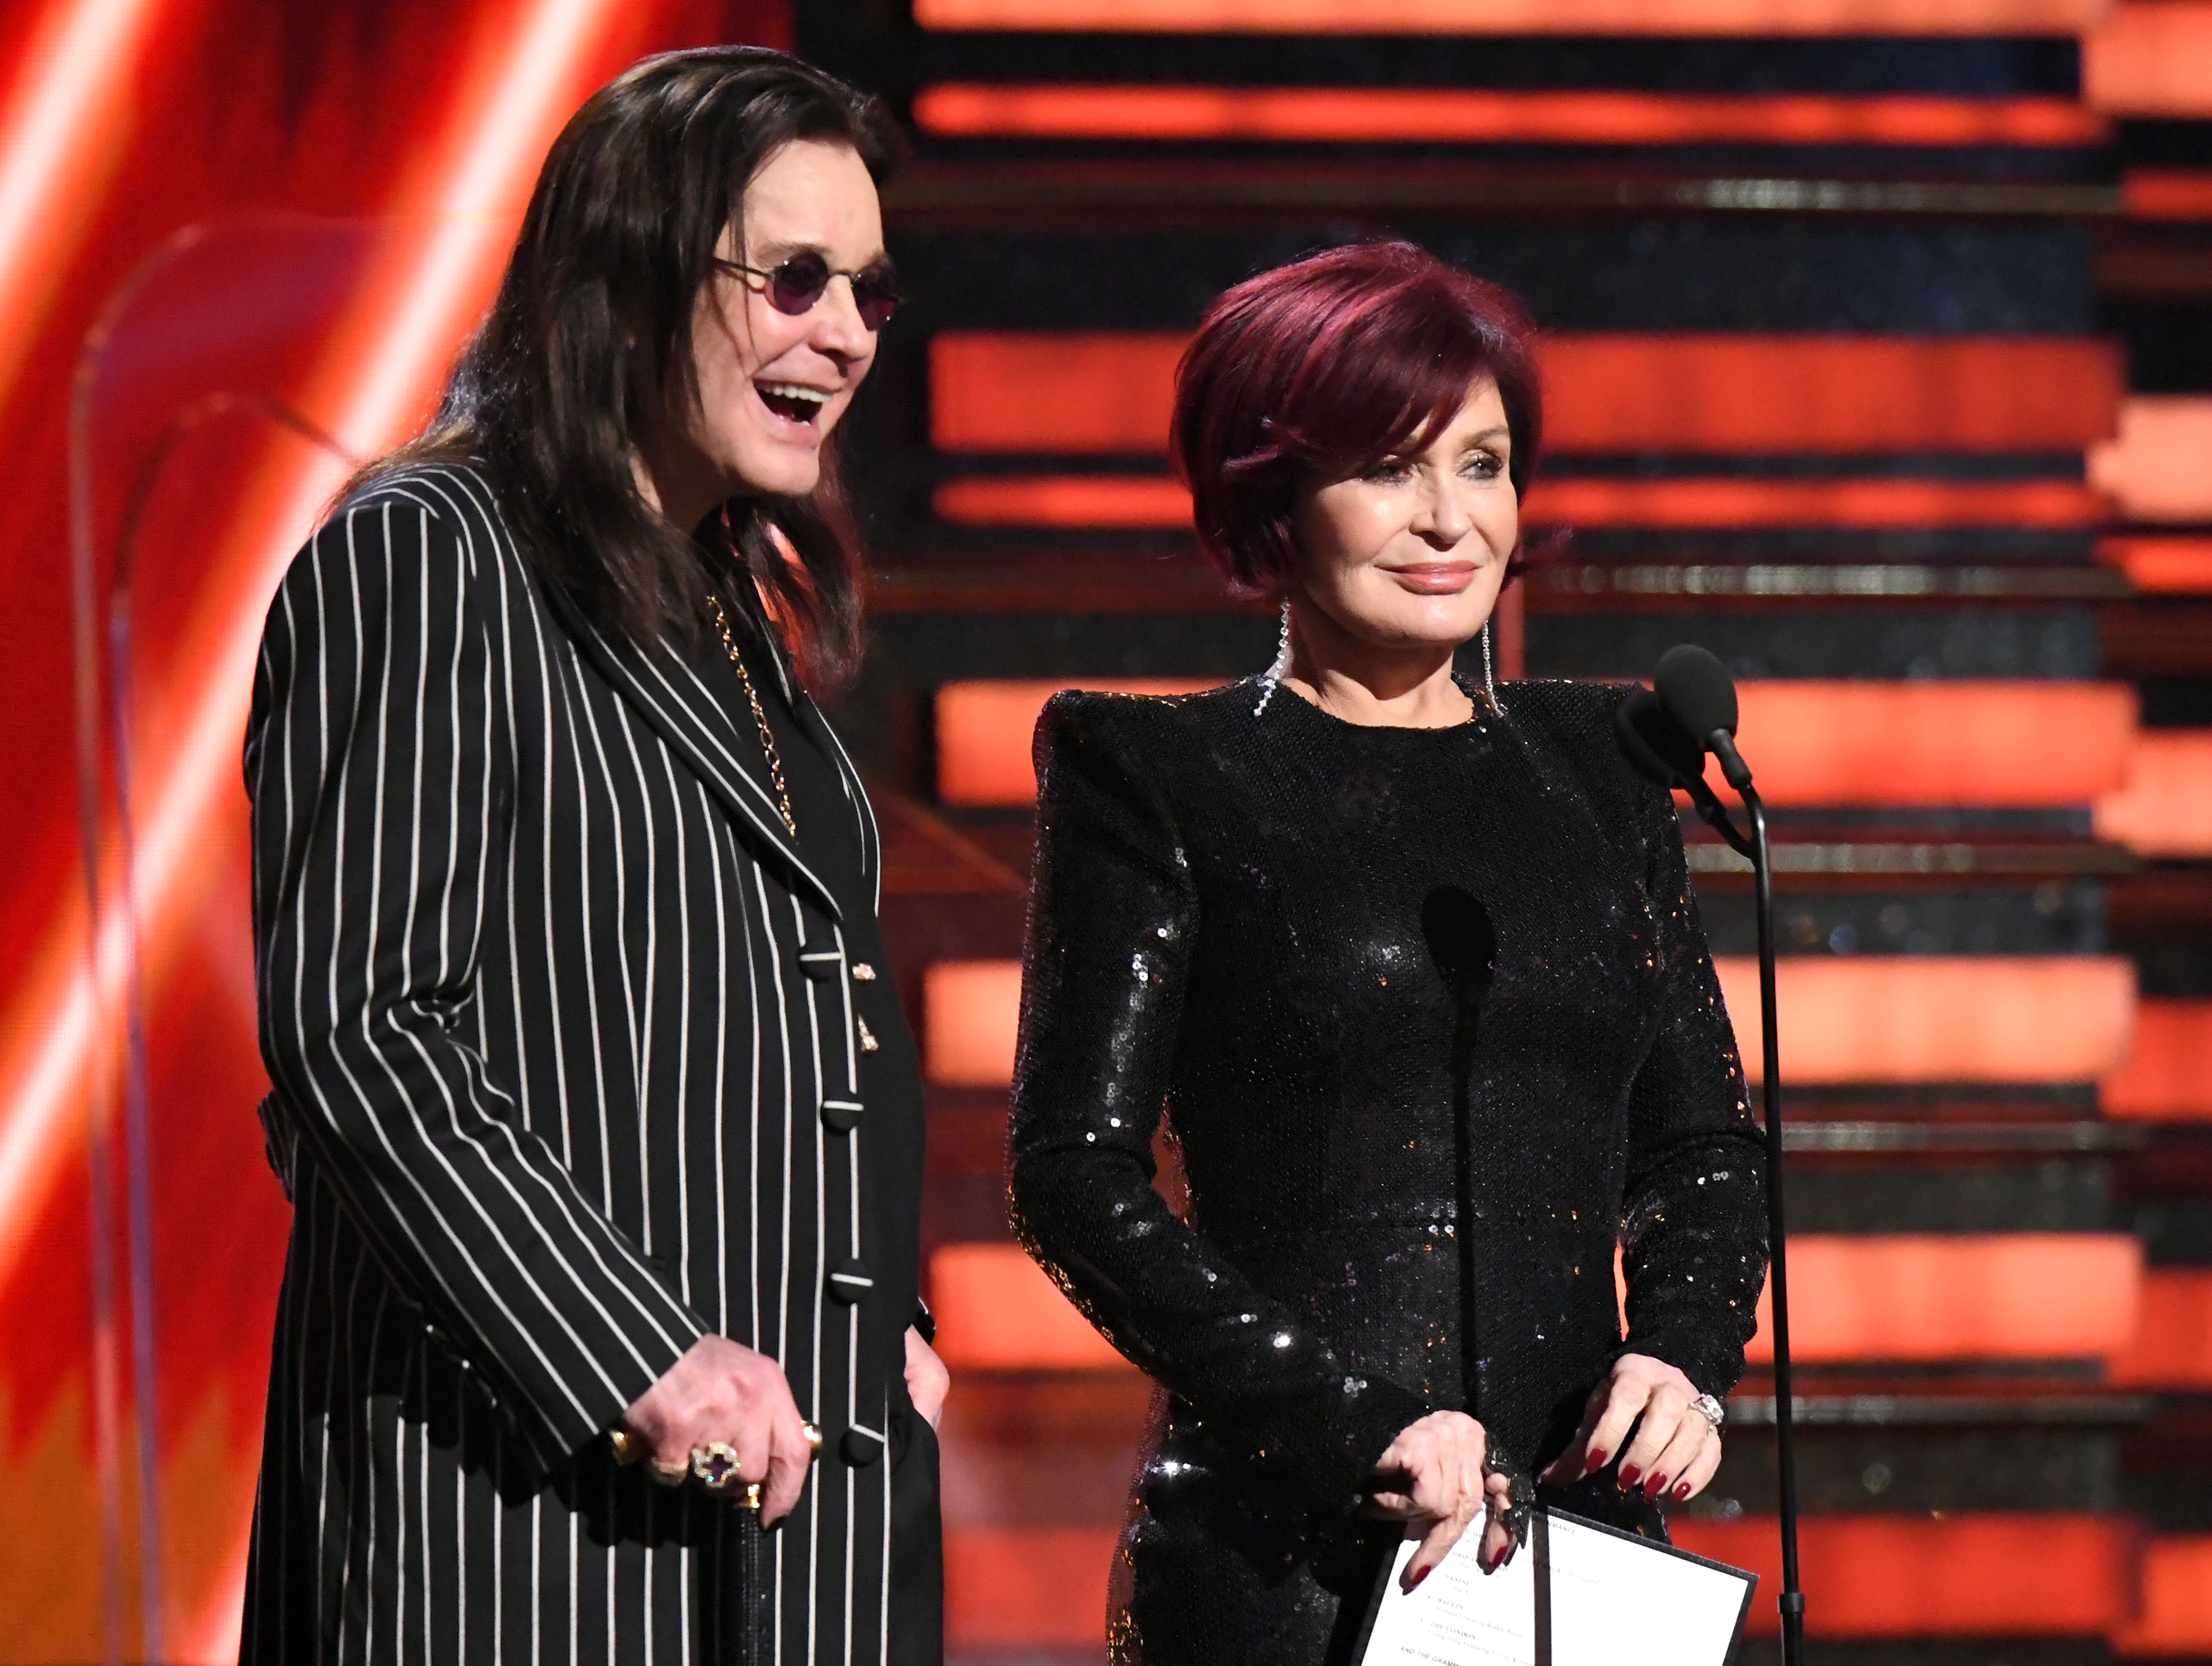 Ozzy Osbourne and Sharon Osbourne speak onstage at the 62nd Annual GRAMMY Awards at Staples Center on January 26, 2020 in Los Angeles, California | Photo: Getty Images